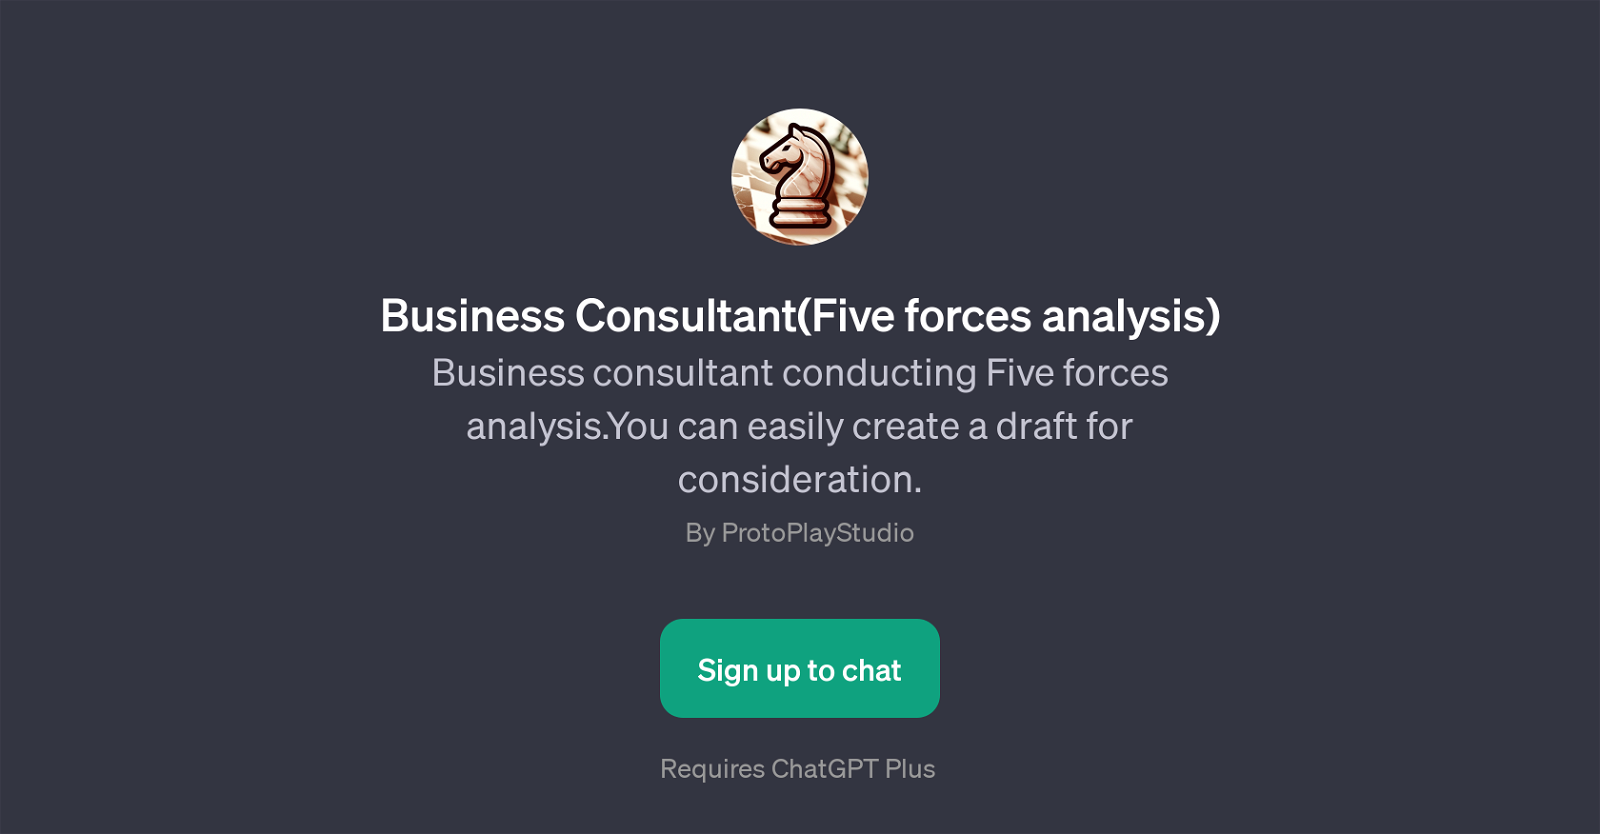 Business Consultant(Five forces analysis) website